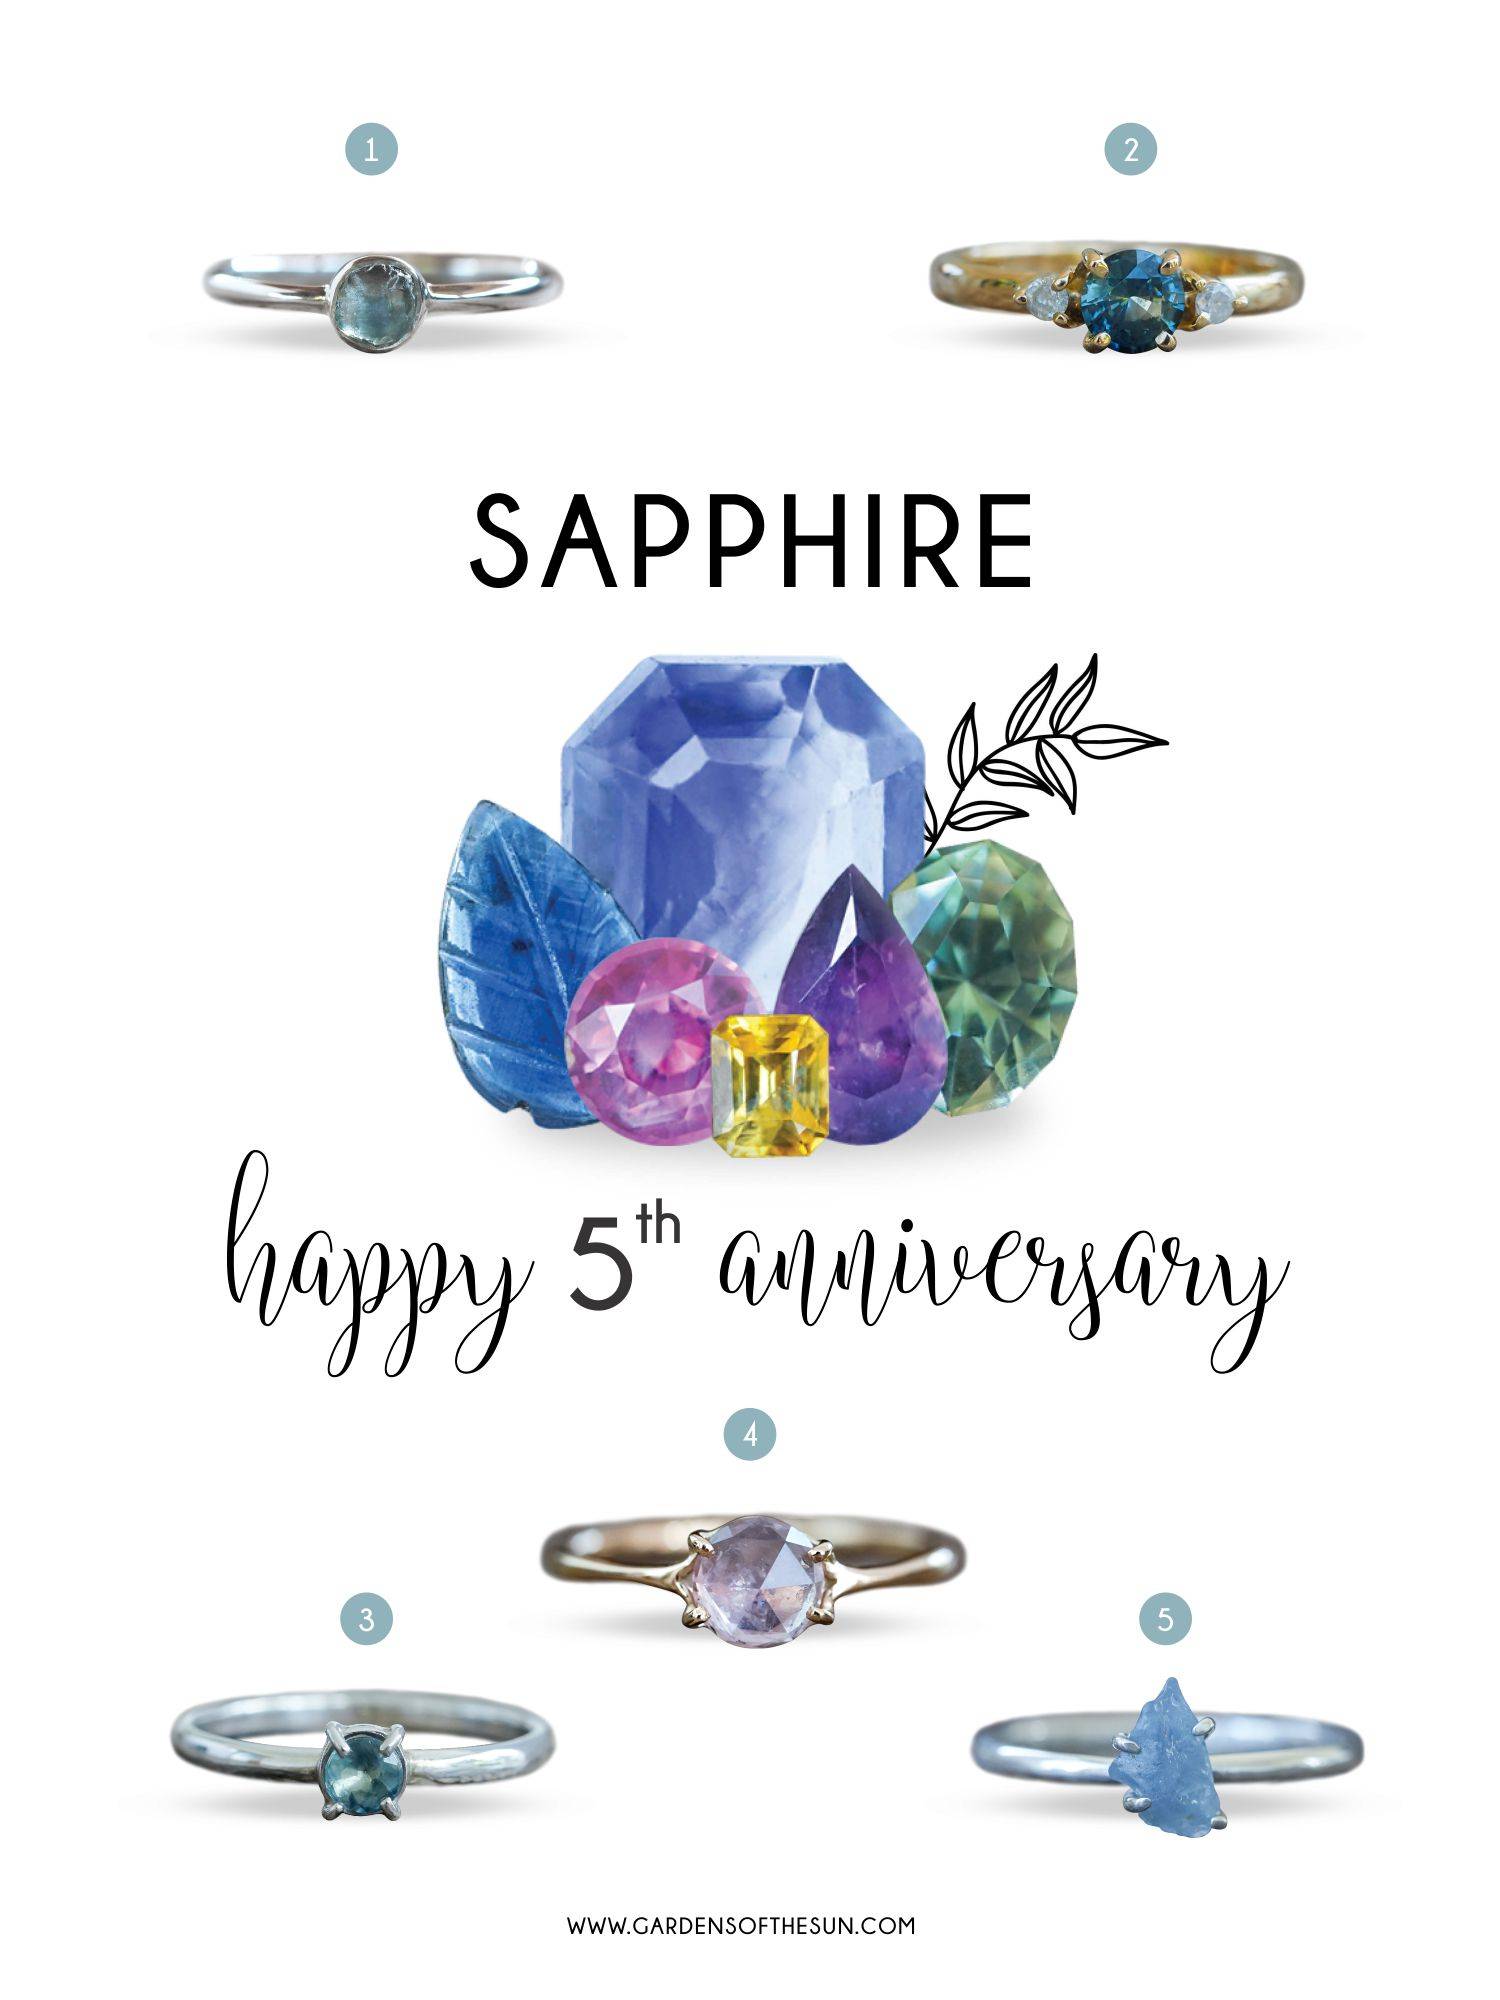 Ethical sapphire jewelry